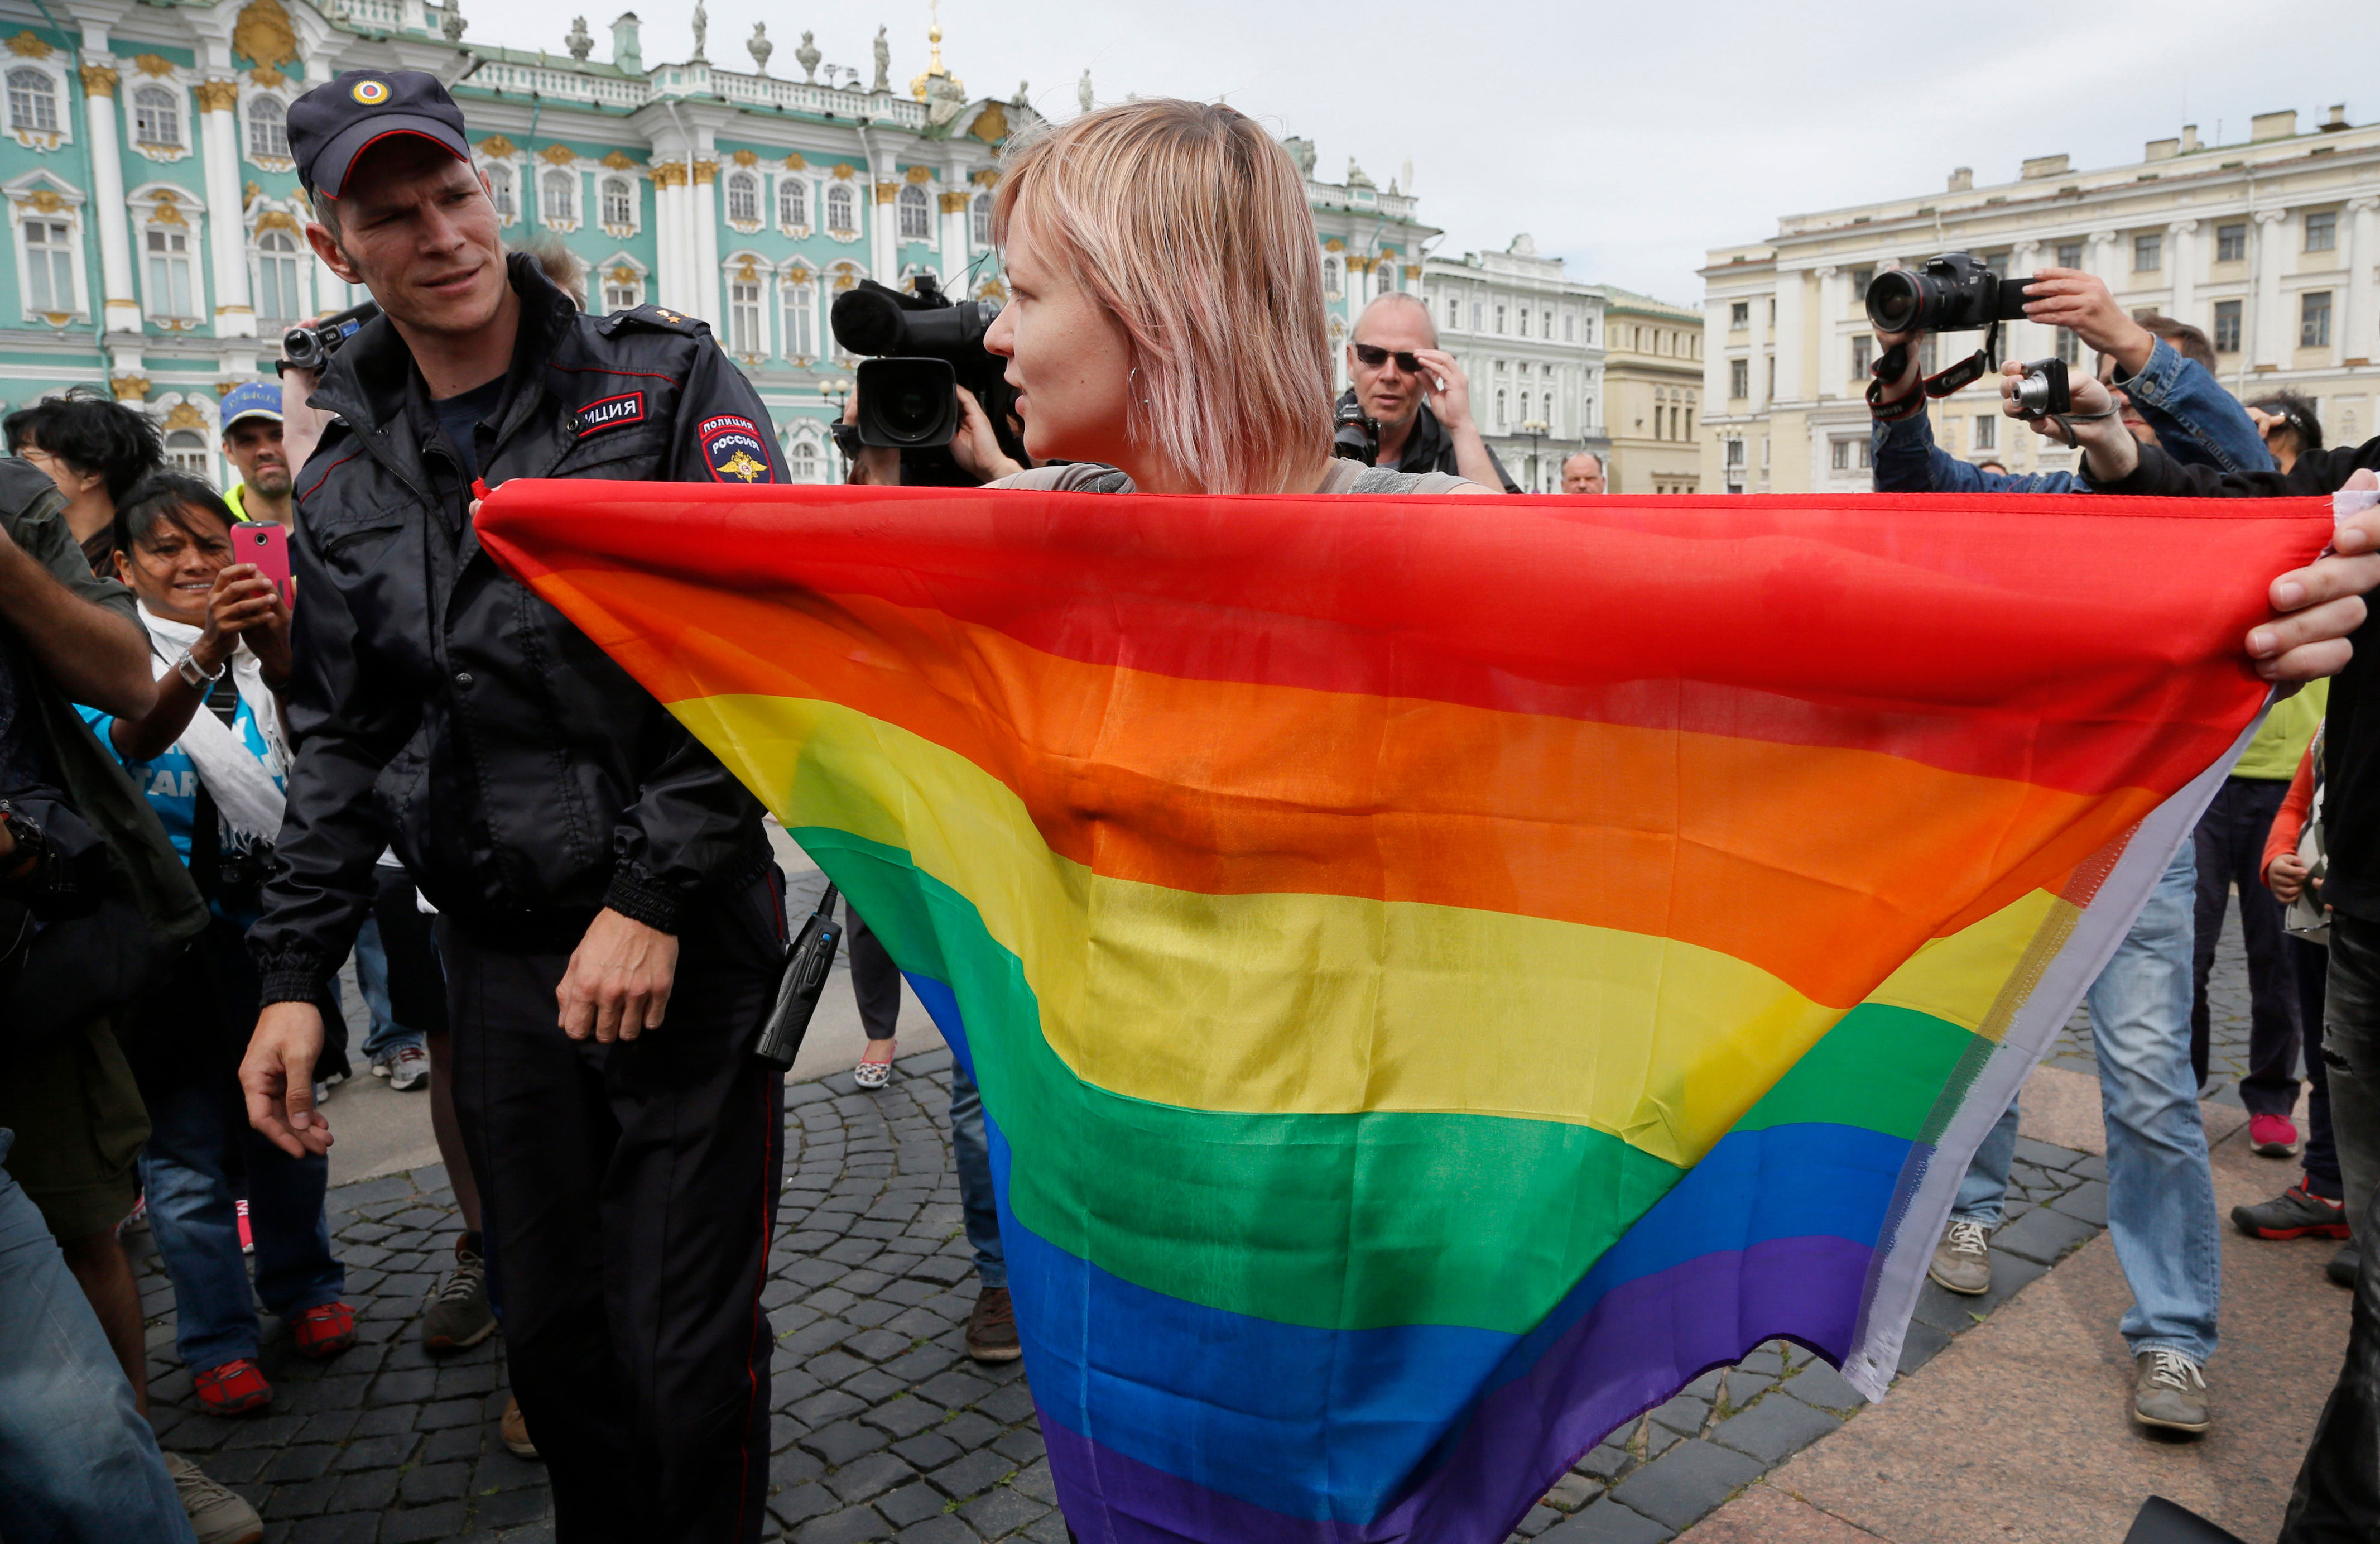 russians arrested as vladimir putin launches crackdown on lgbtq community